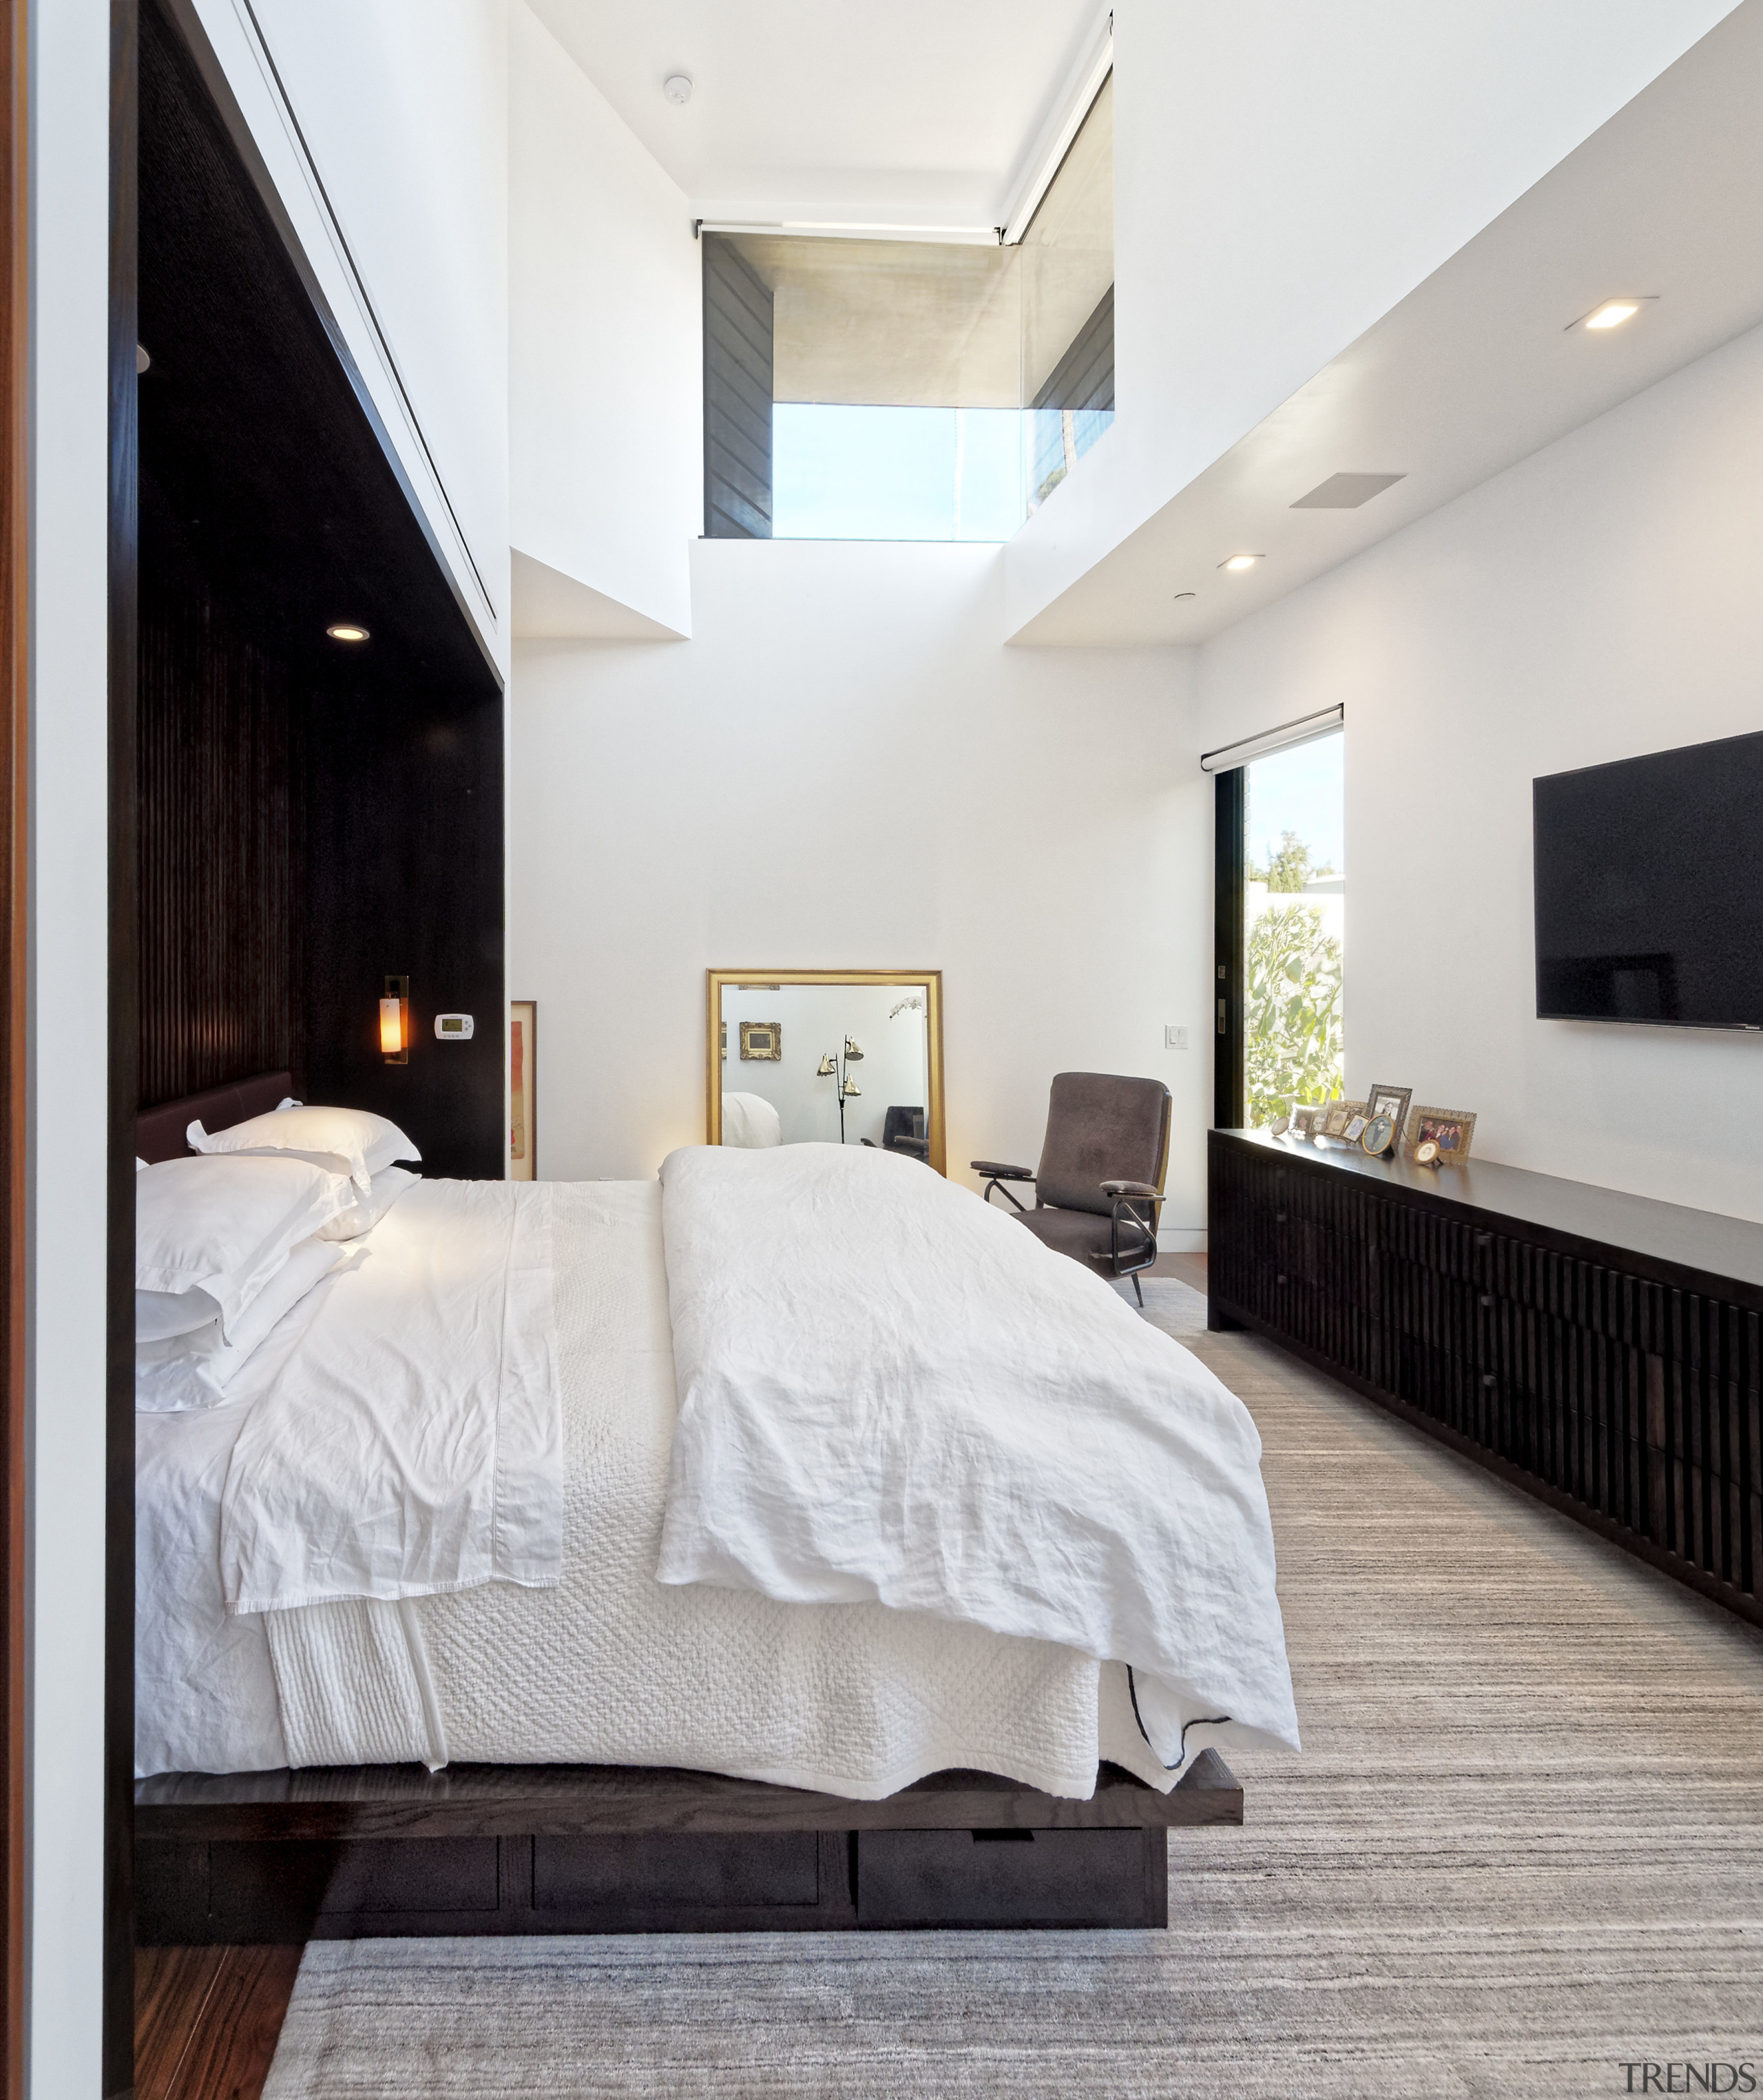 A clerestory window high on the 5.5m-high front bed, bed frame, bedroom, ceiling, floor, flooring, furniture, home, interior design, real estate, room, suite, wood, gray, white